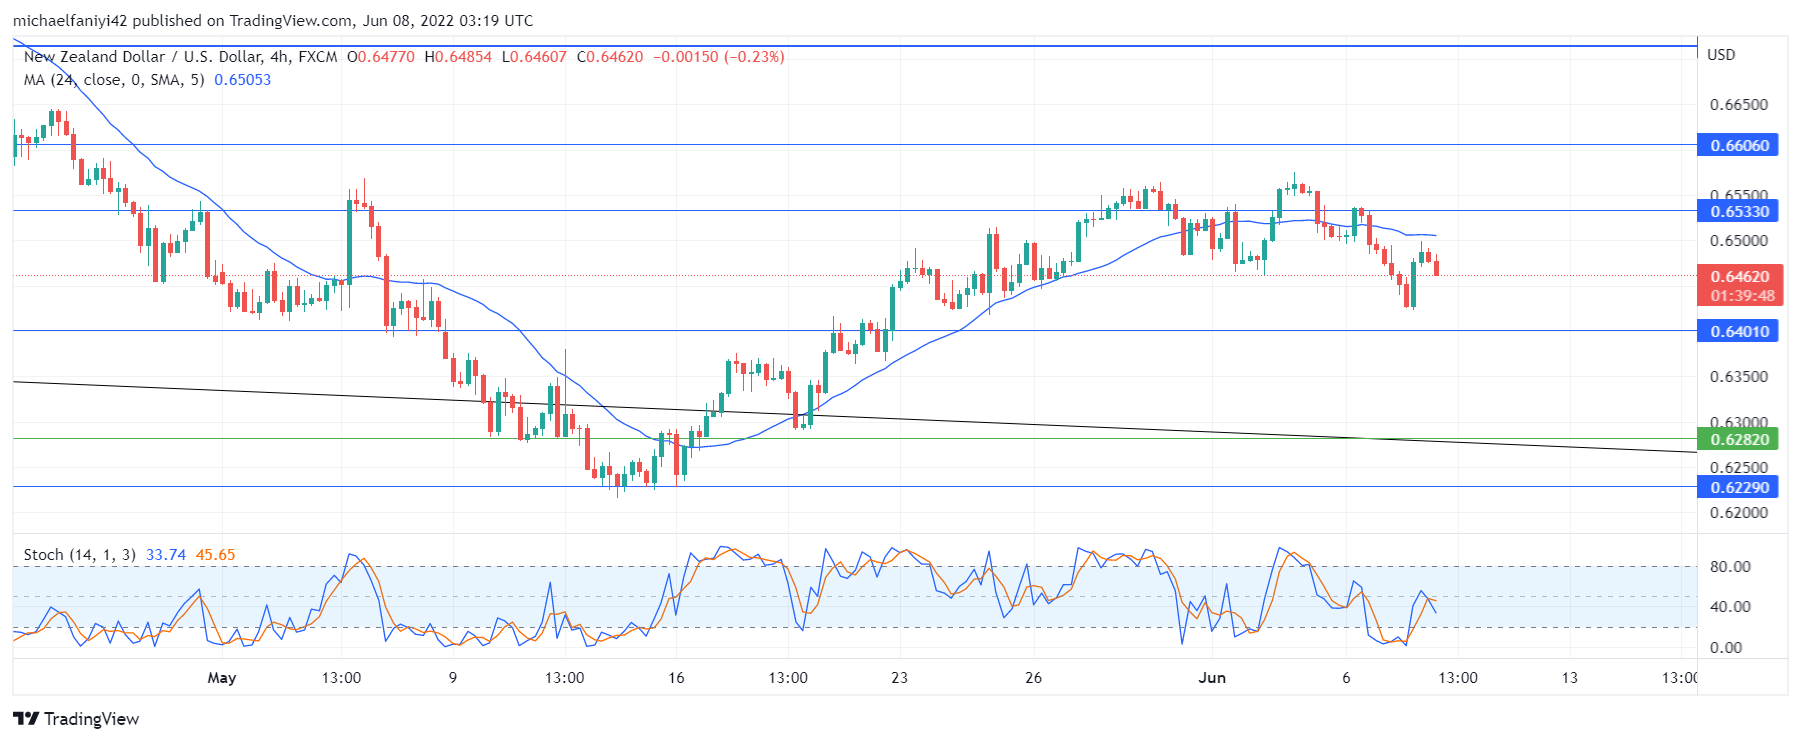 NZDUSD Pulls Back for Support at the 0.64010 Price Level 